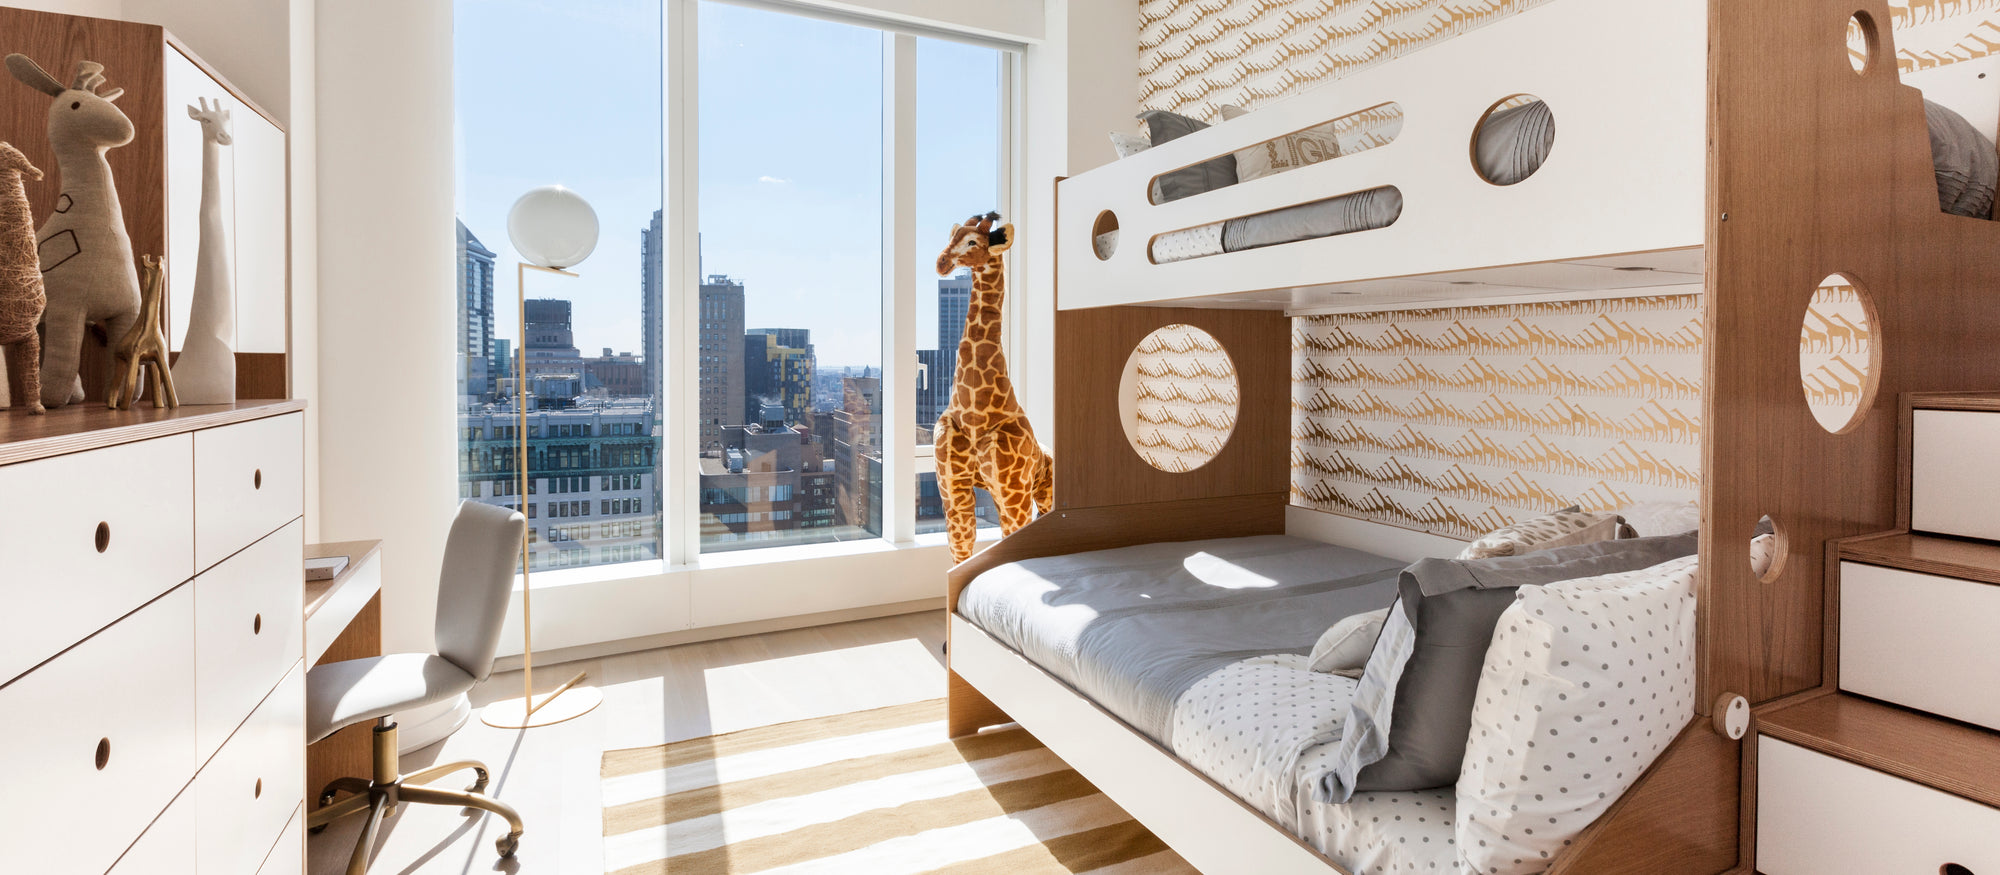 Modern children's room with wooden murphy bed, built-in storage, large windows overlooking the city.